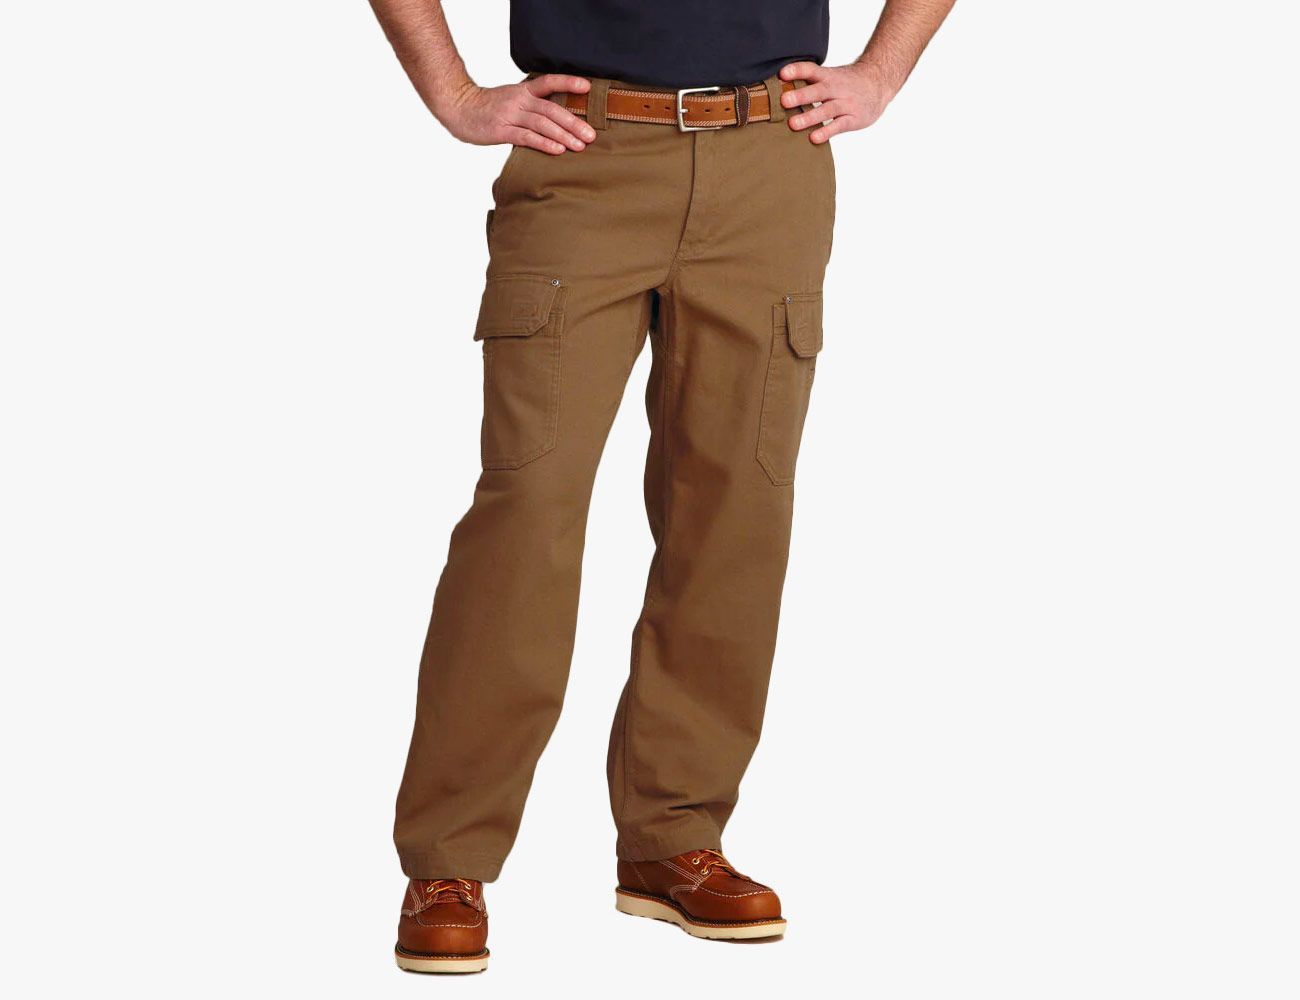 Carhartt Rugged Flex Rigby Dungaree Knit Lined Relaxed Fit Work Pants    Marks